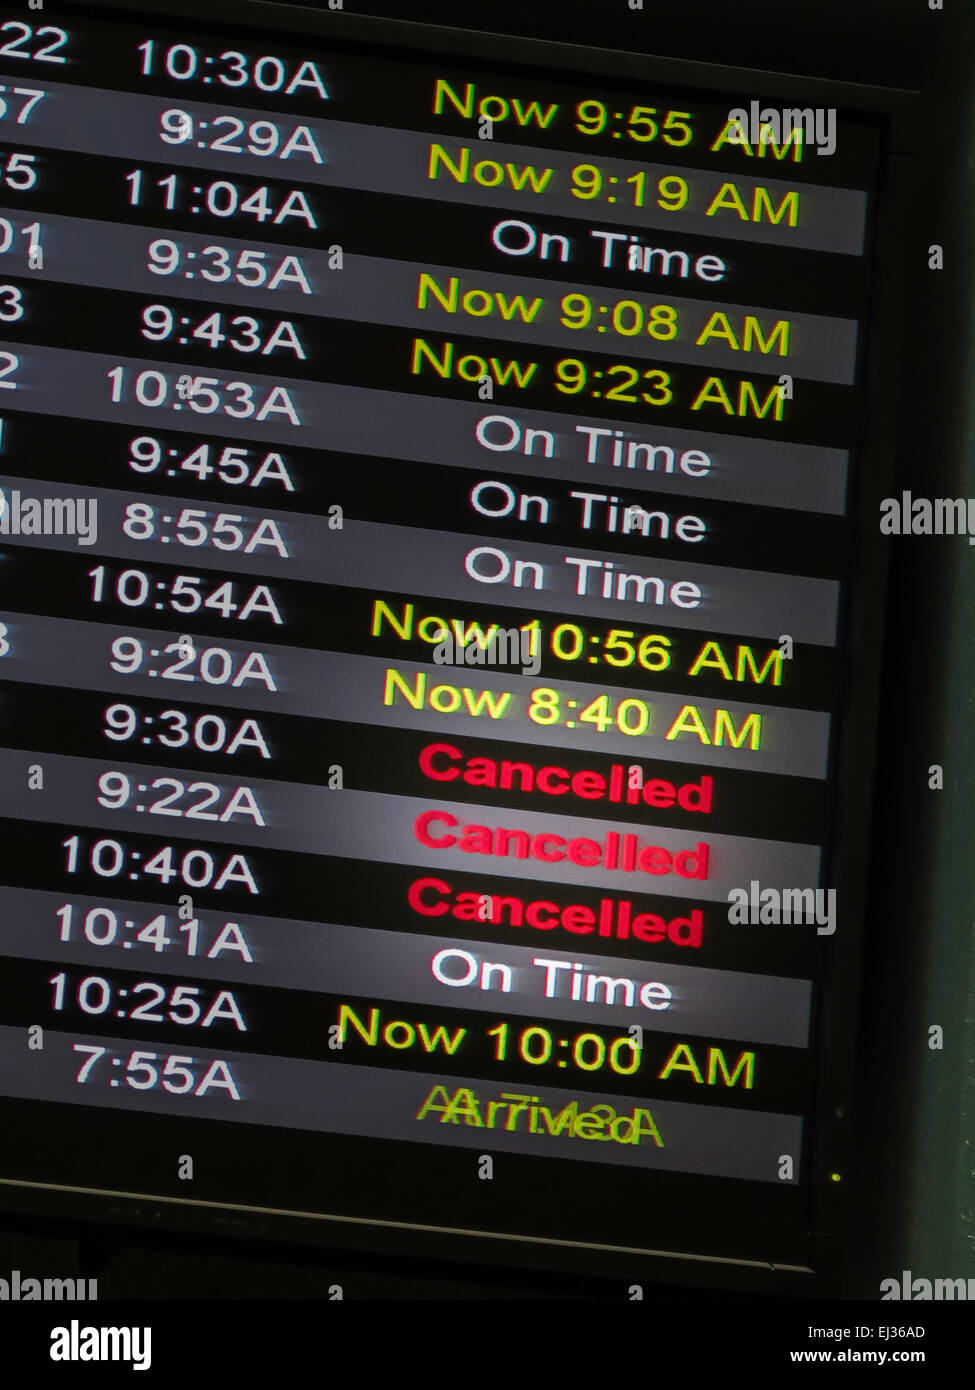 Airport Flight Arrival/Departure Board, USA Stock Photo - Alamy